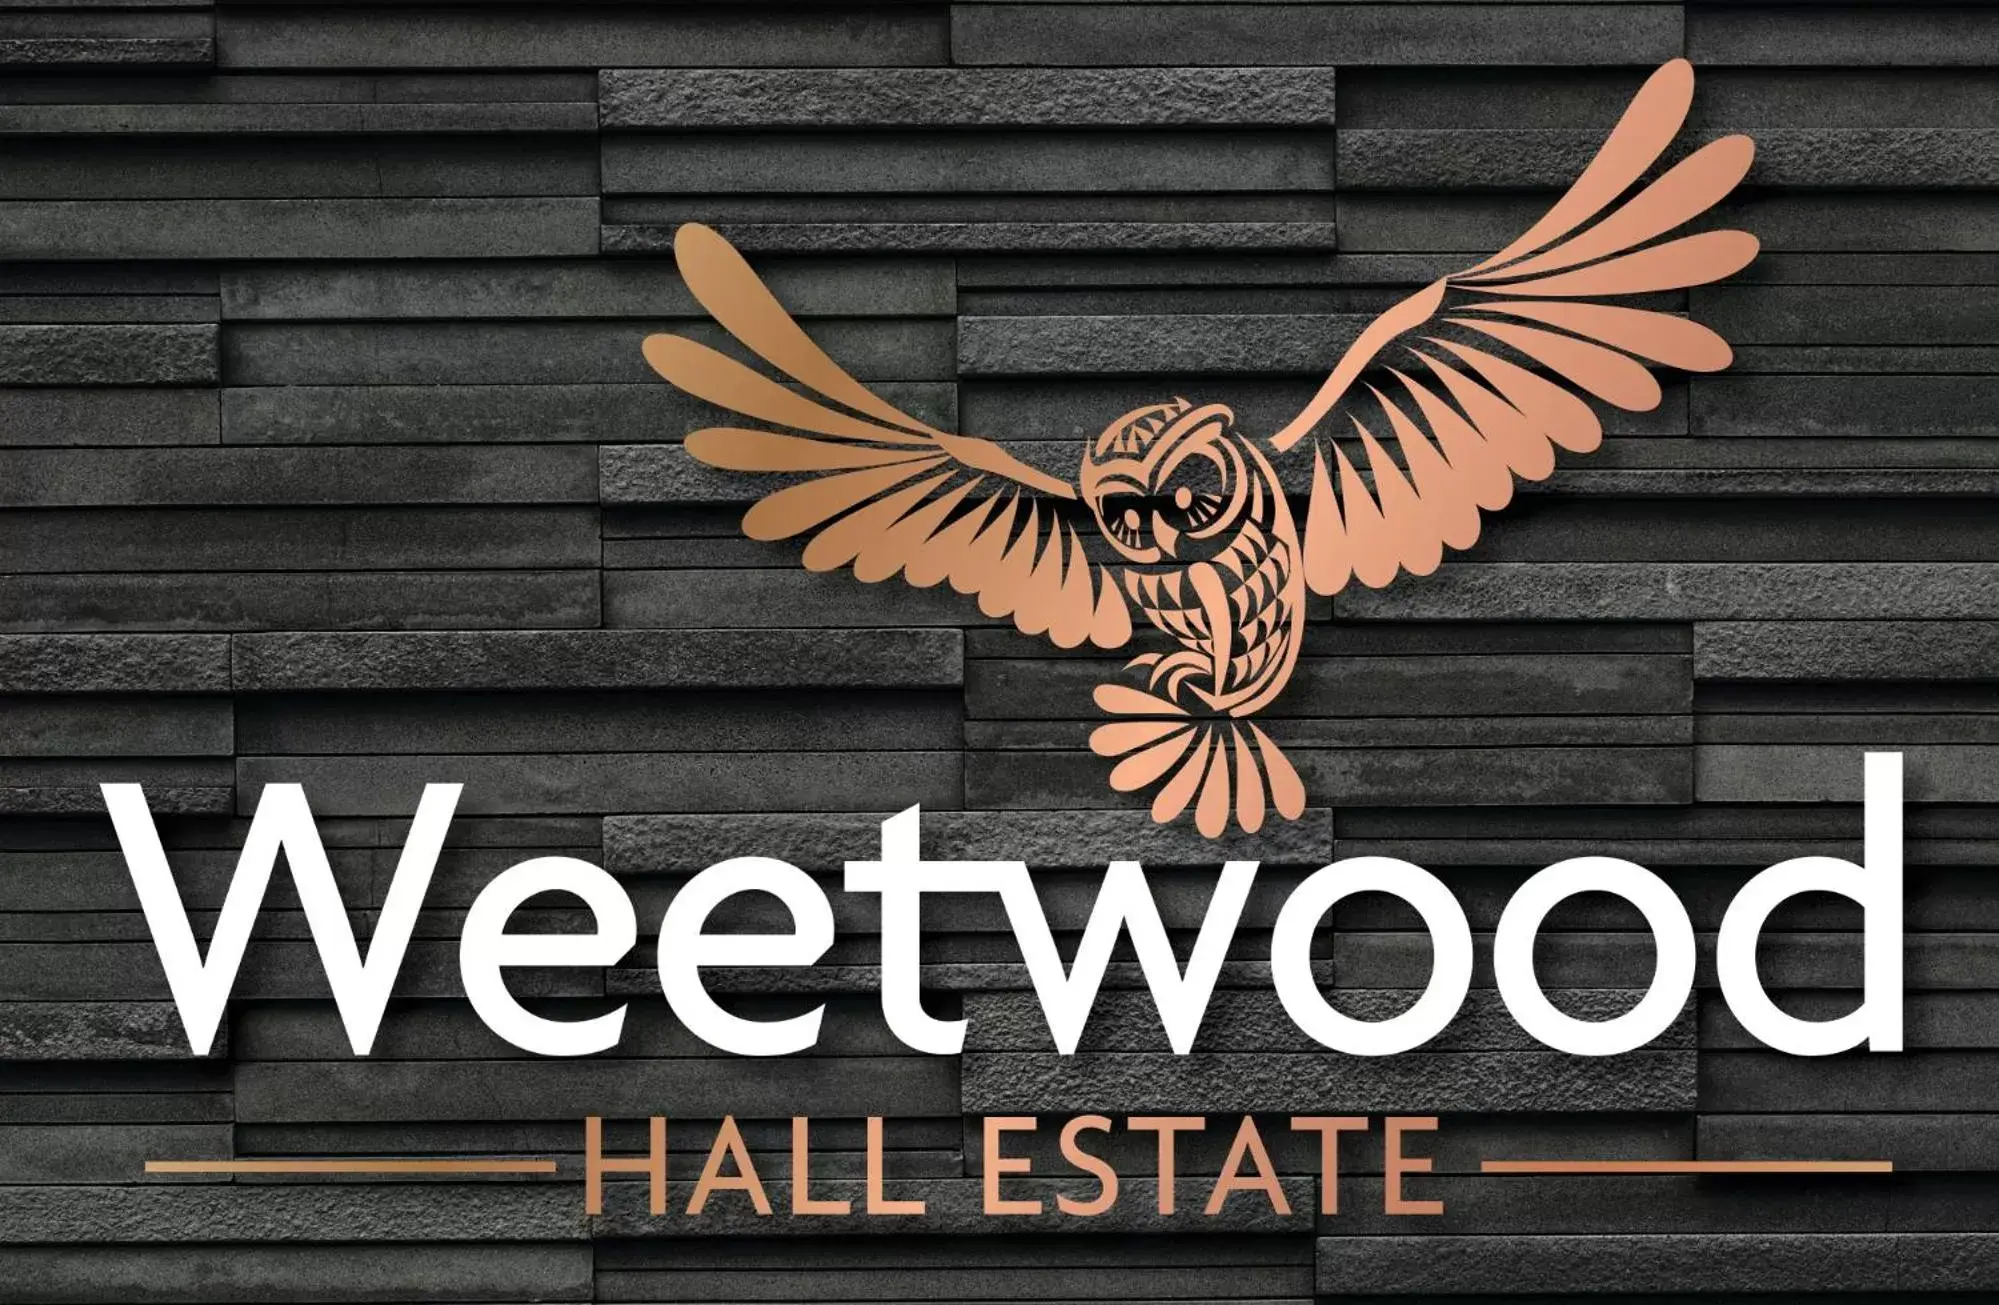 Certificate/Award, Property Logo/Sign in Weetwood Hall Estate